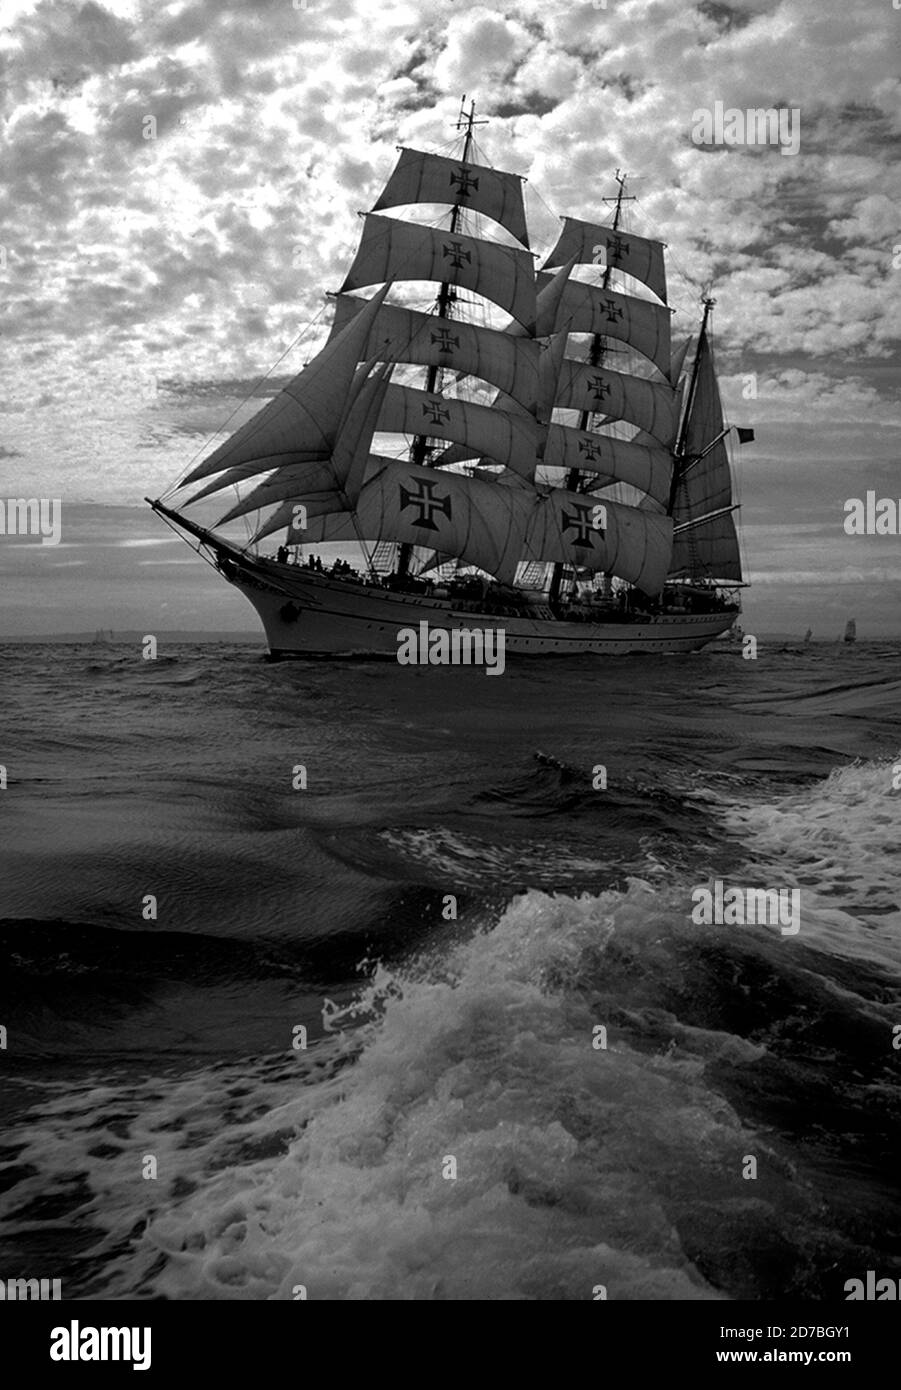 AJAXNETPHOTO. 1994. WEYMOUTH,ENGLAND - TALL SHIPS - THE PORTUGEUSE SAIL TRAINING SHIP SAGRES HEADS OUT TO SEA AT THE START OF THE TALL SHIPS RACE.  PHOTO:JONATHAN EASTLAND/AJAX.  REF:7 98 Stock Photo